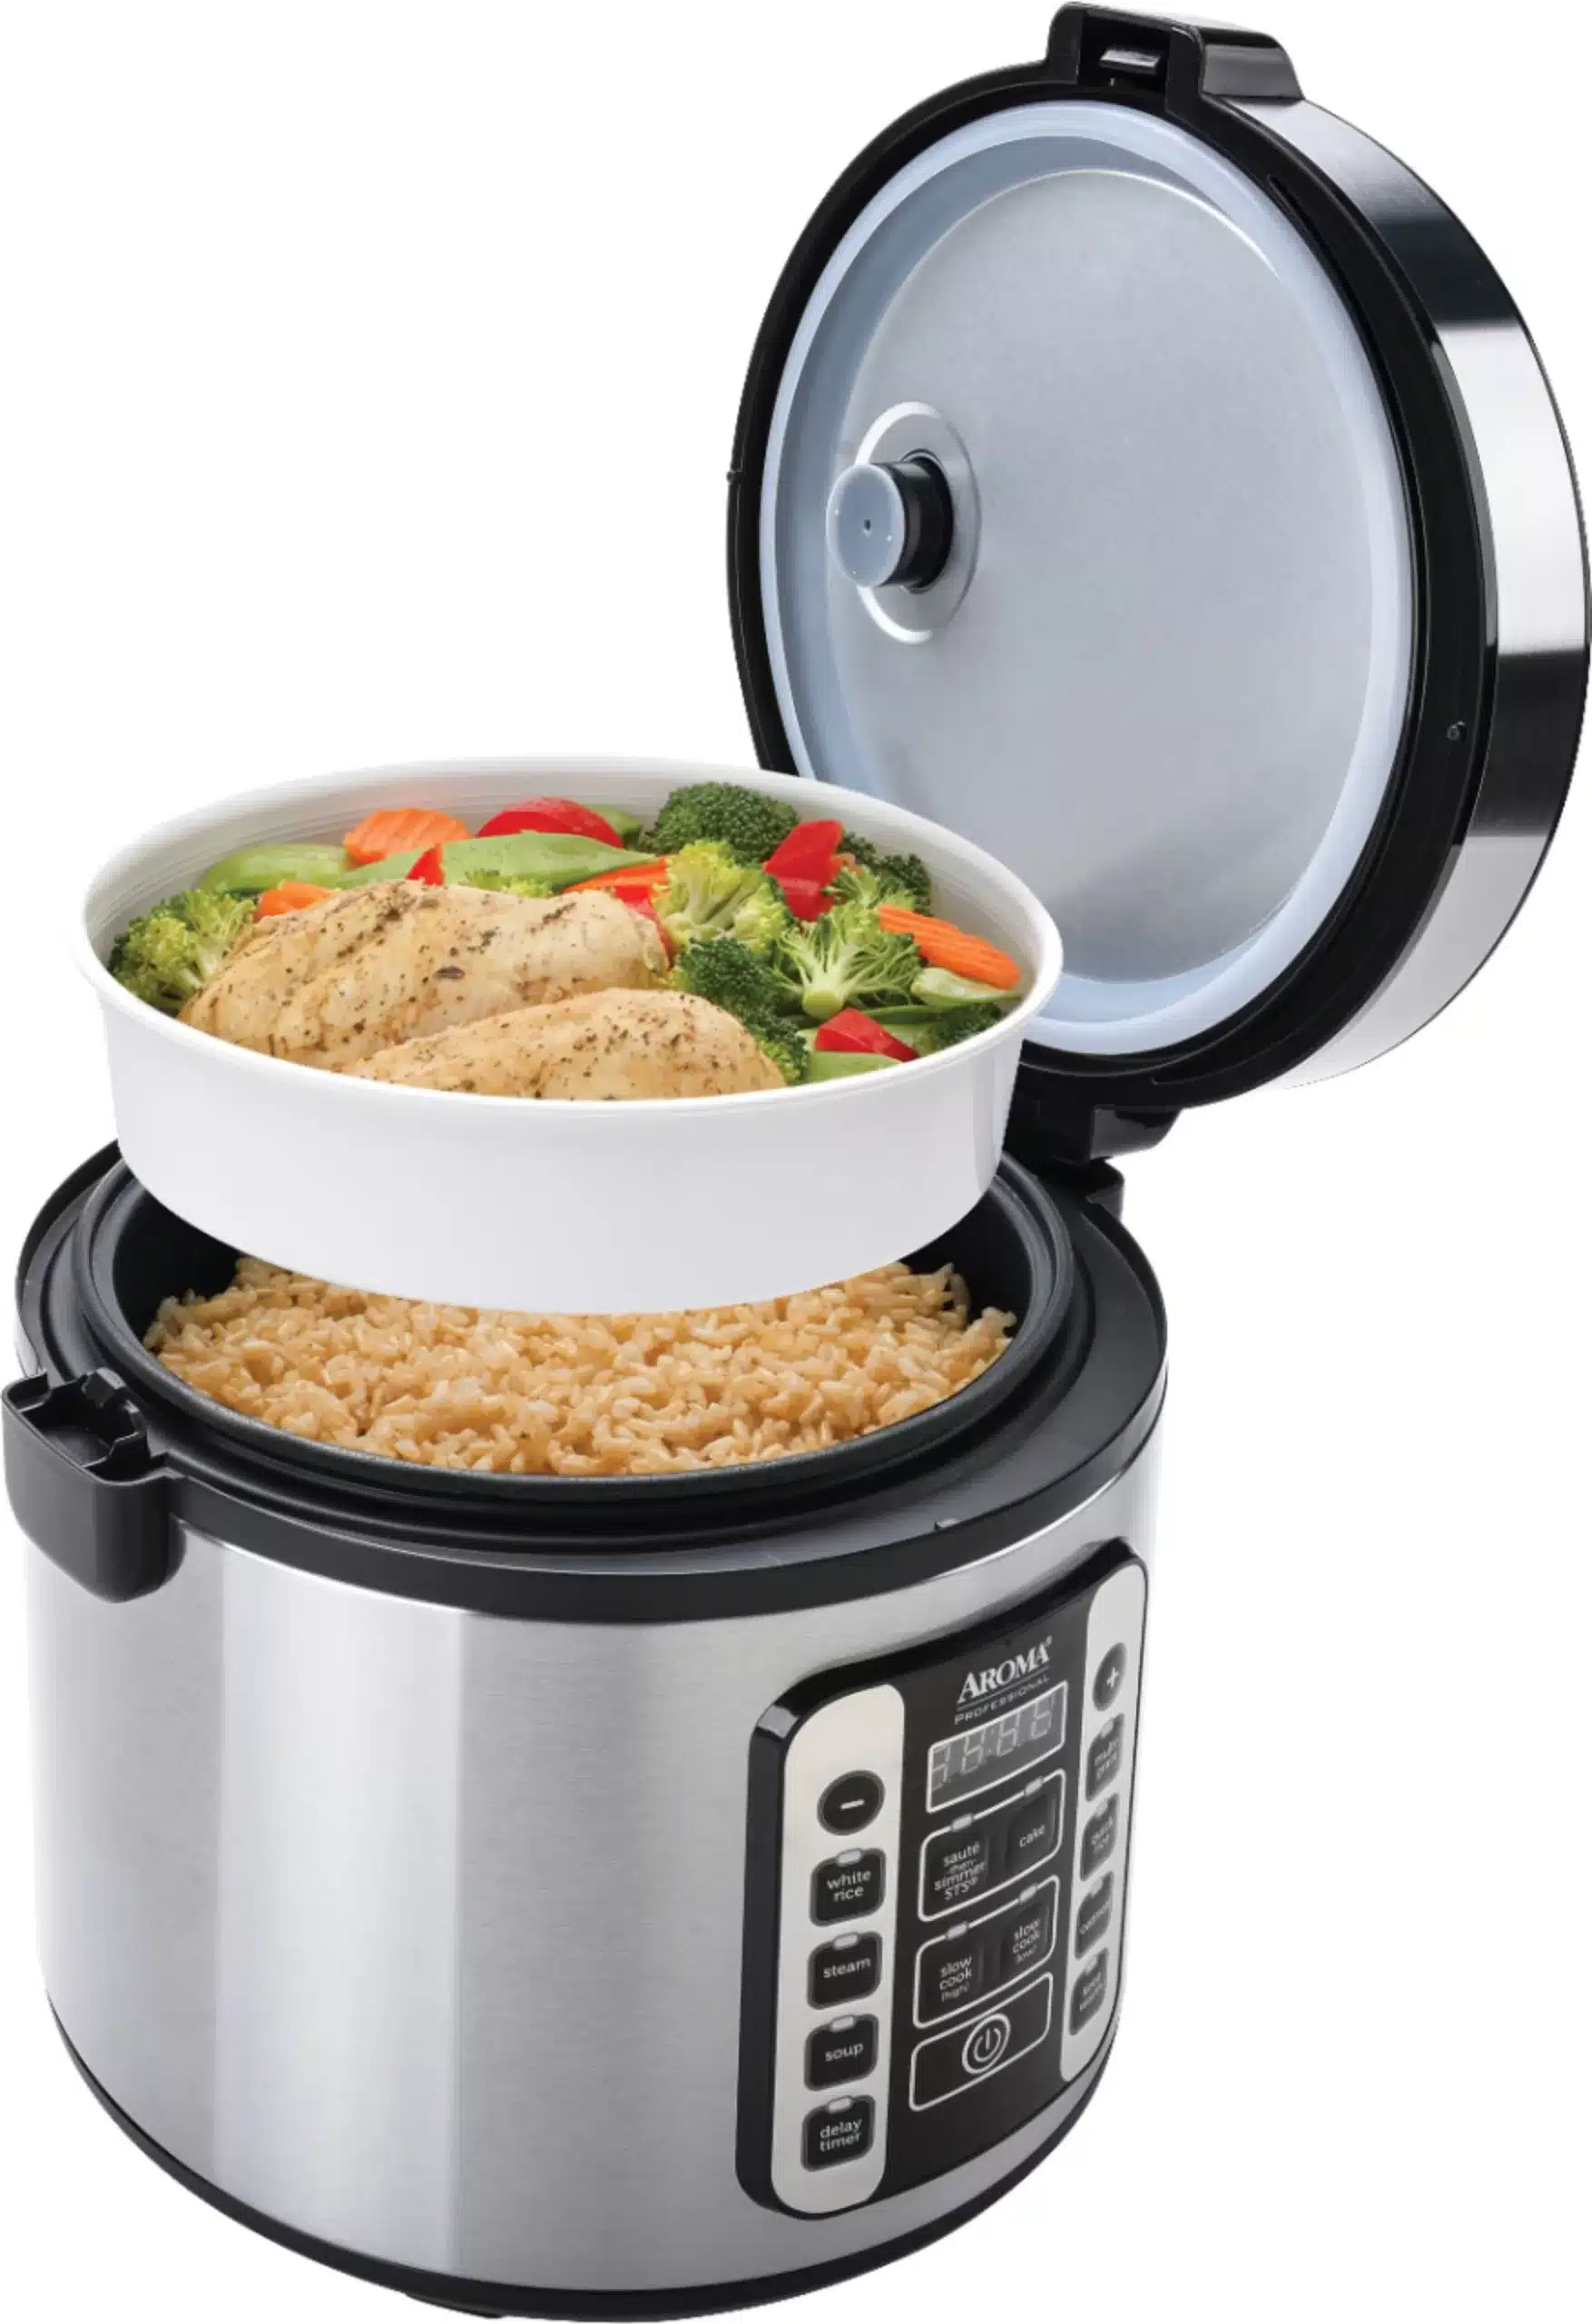 aroma-rice-cooker-steame